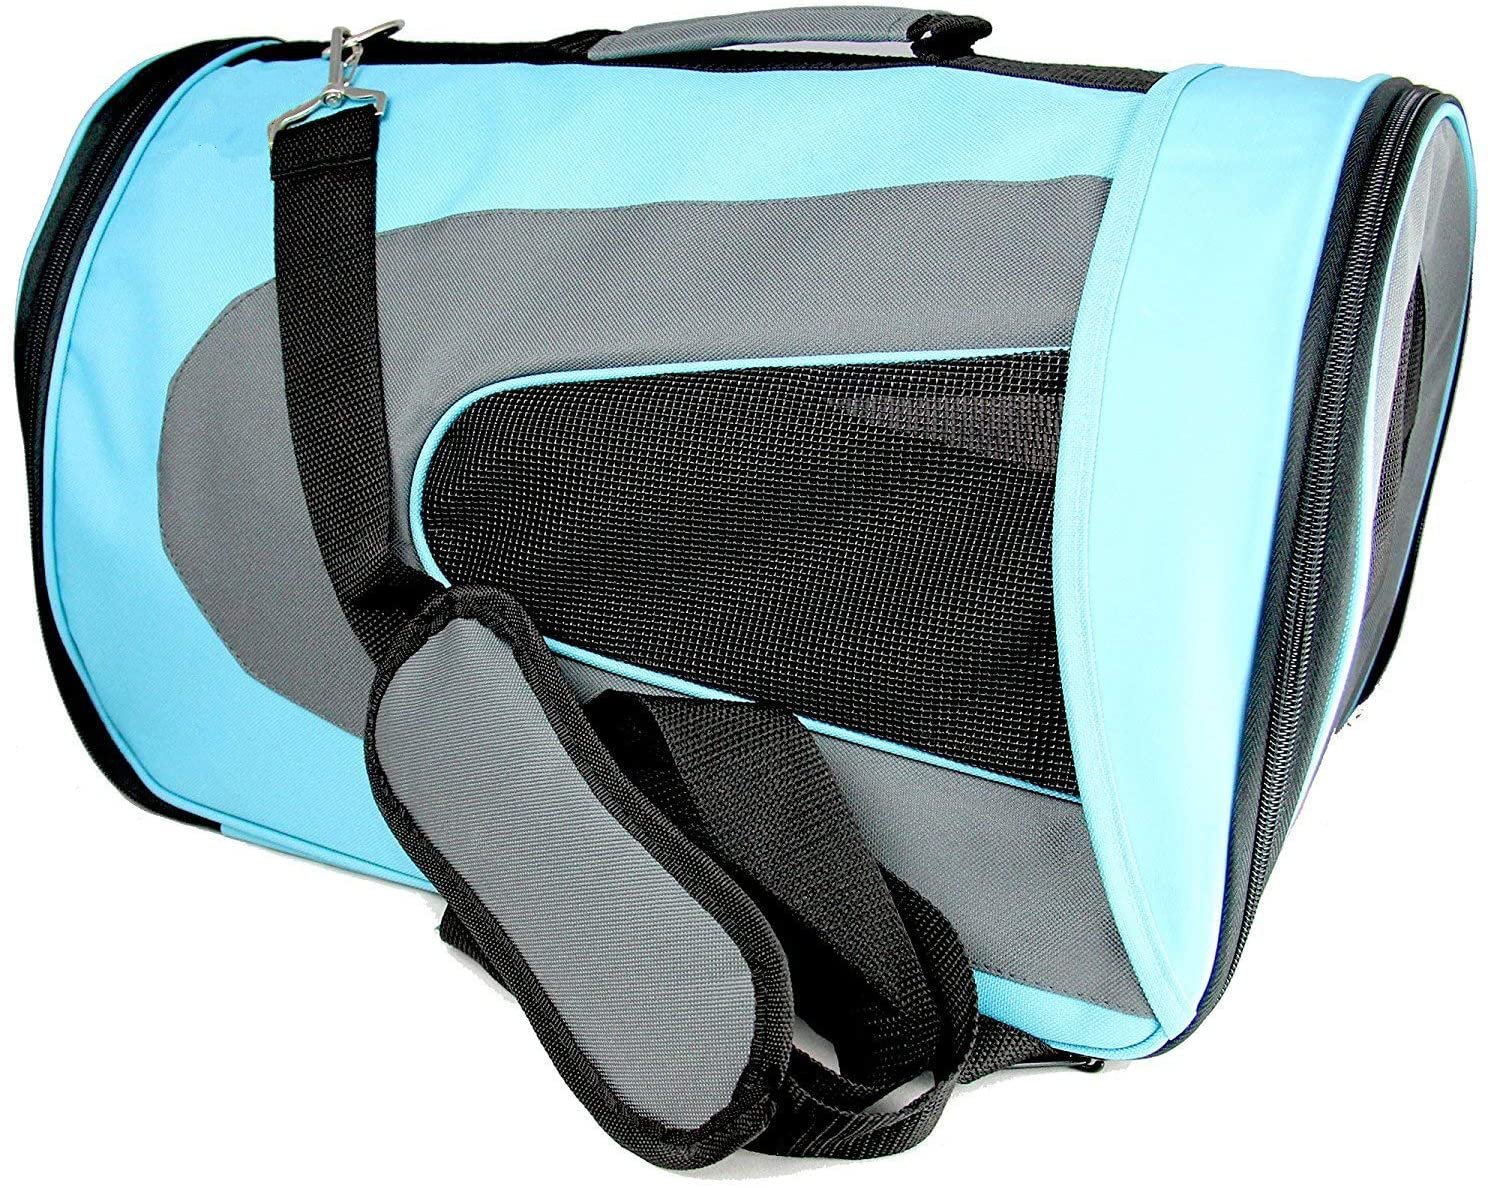 Airline Approved Cat Carrier